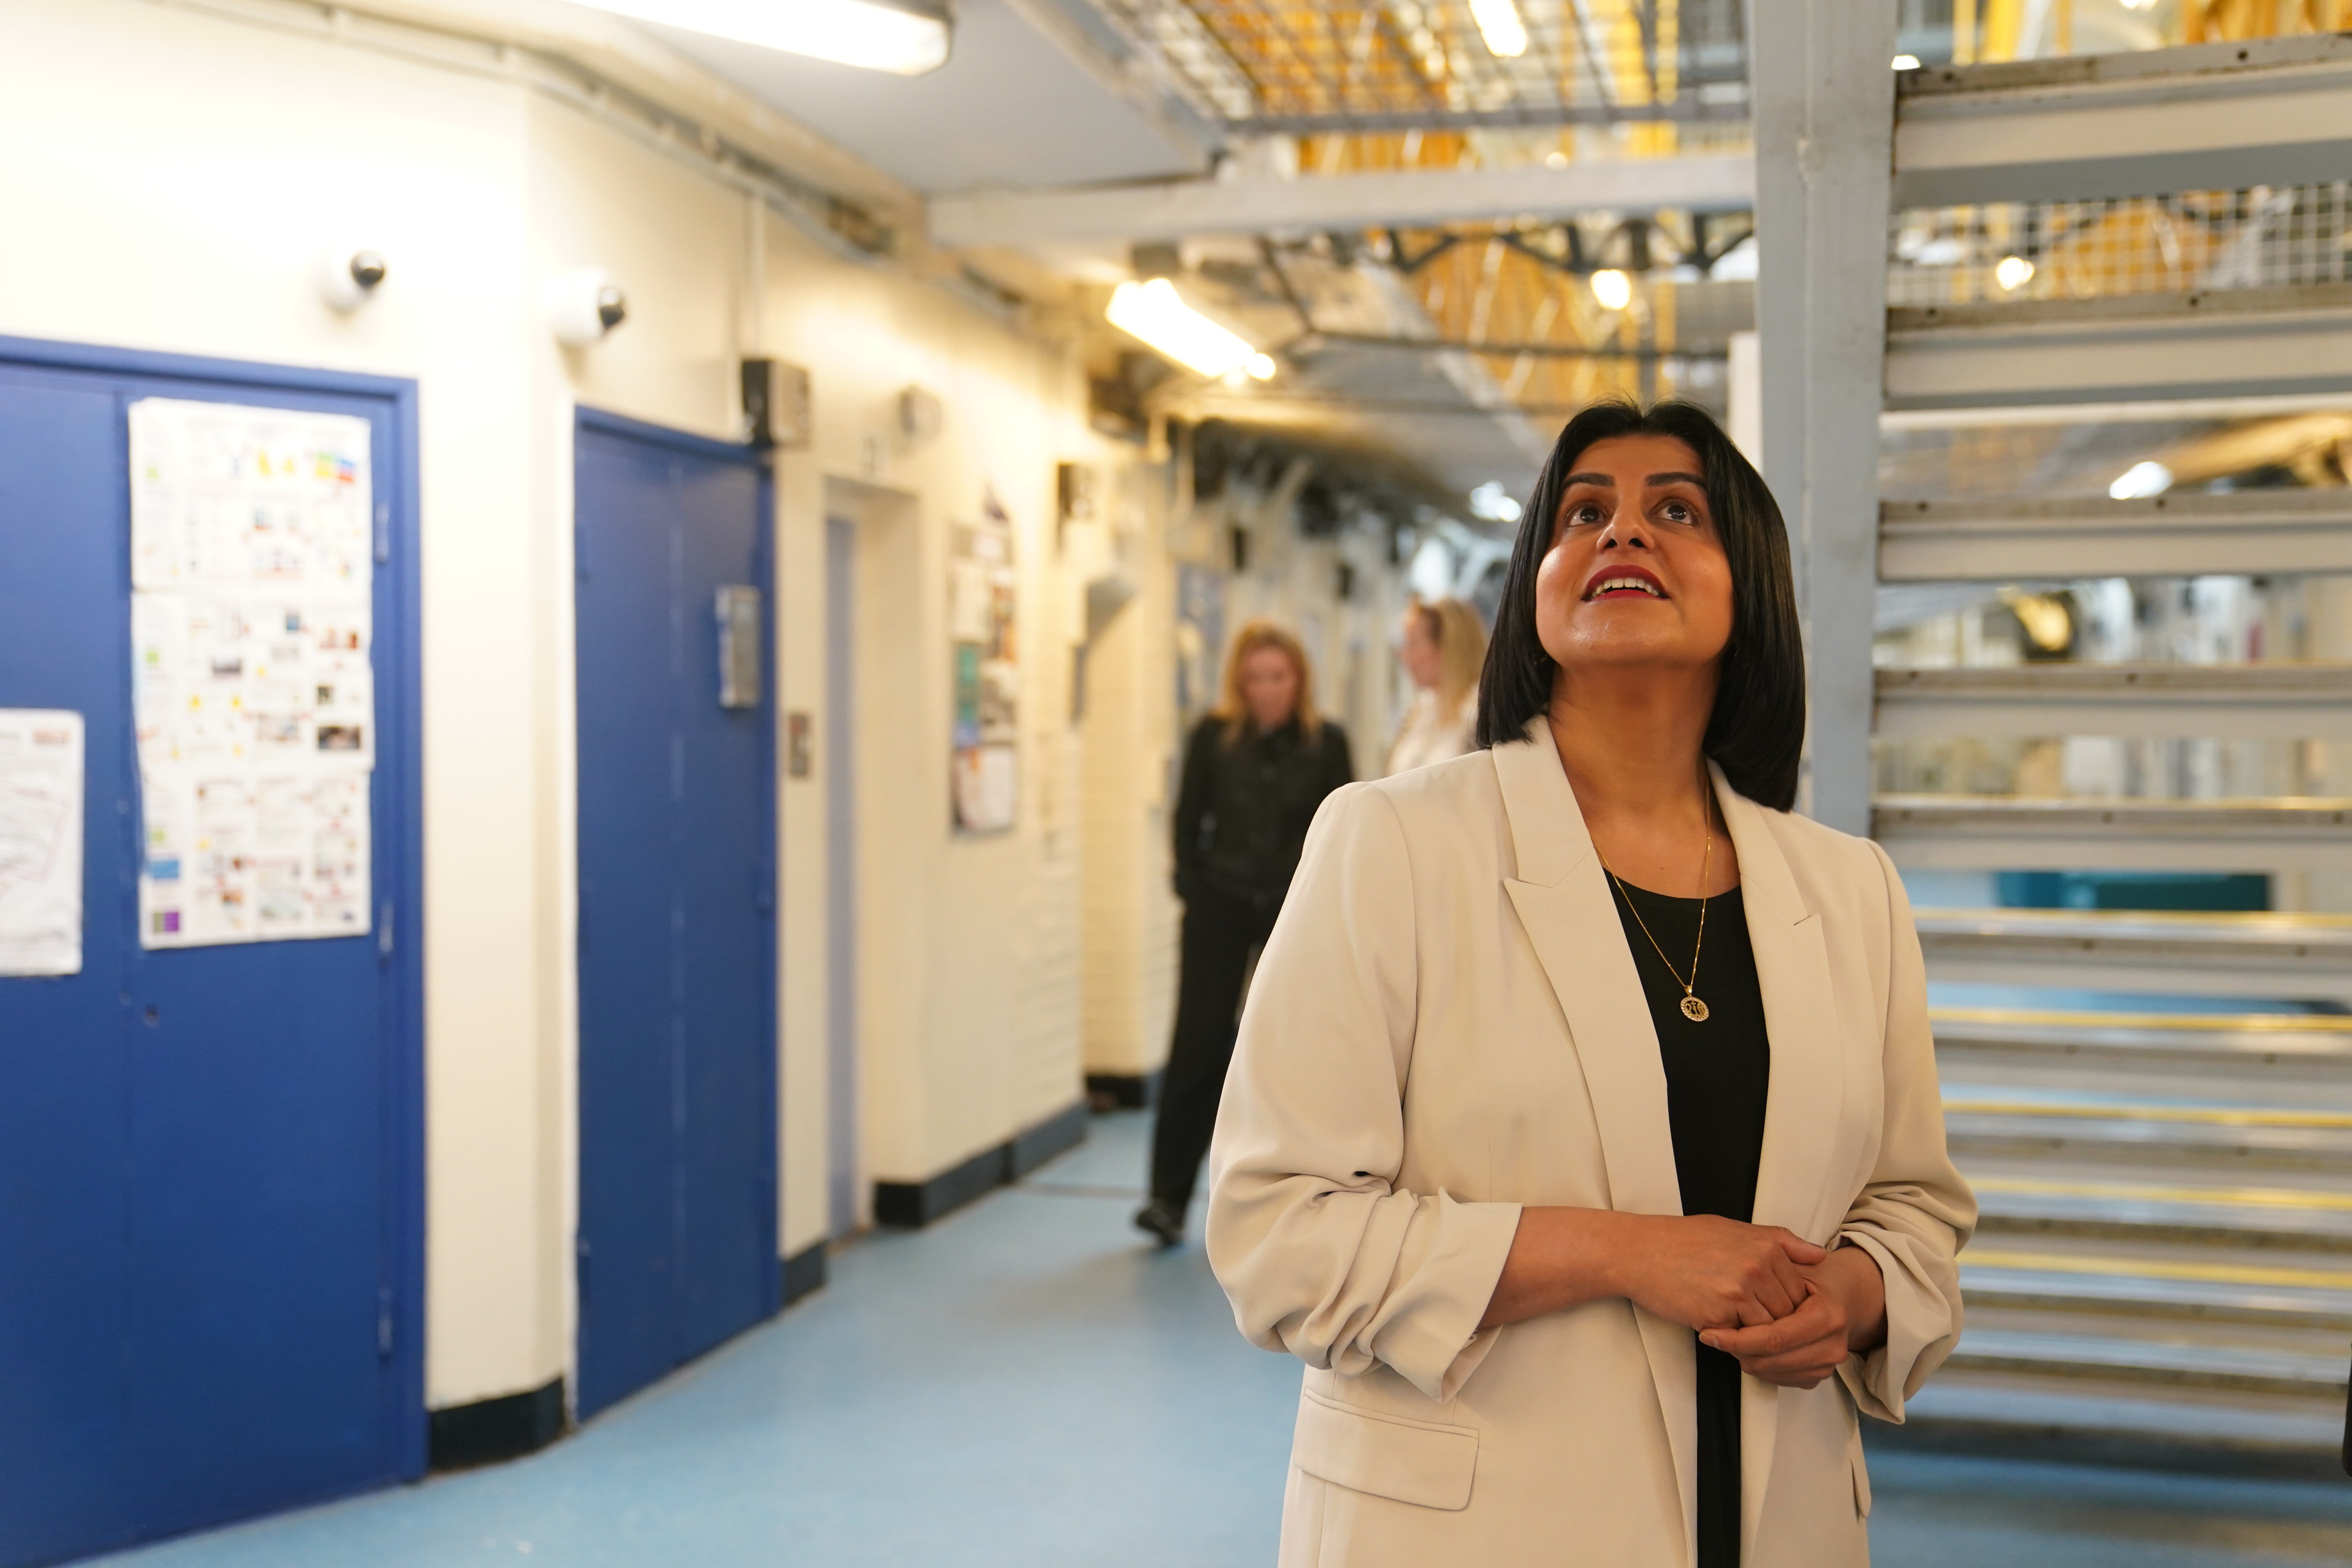 Shabana Mahmood visited HMP Bedford and HMP Five Wells on Friday